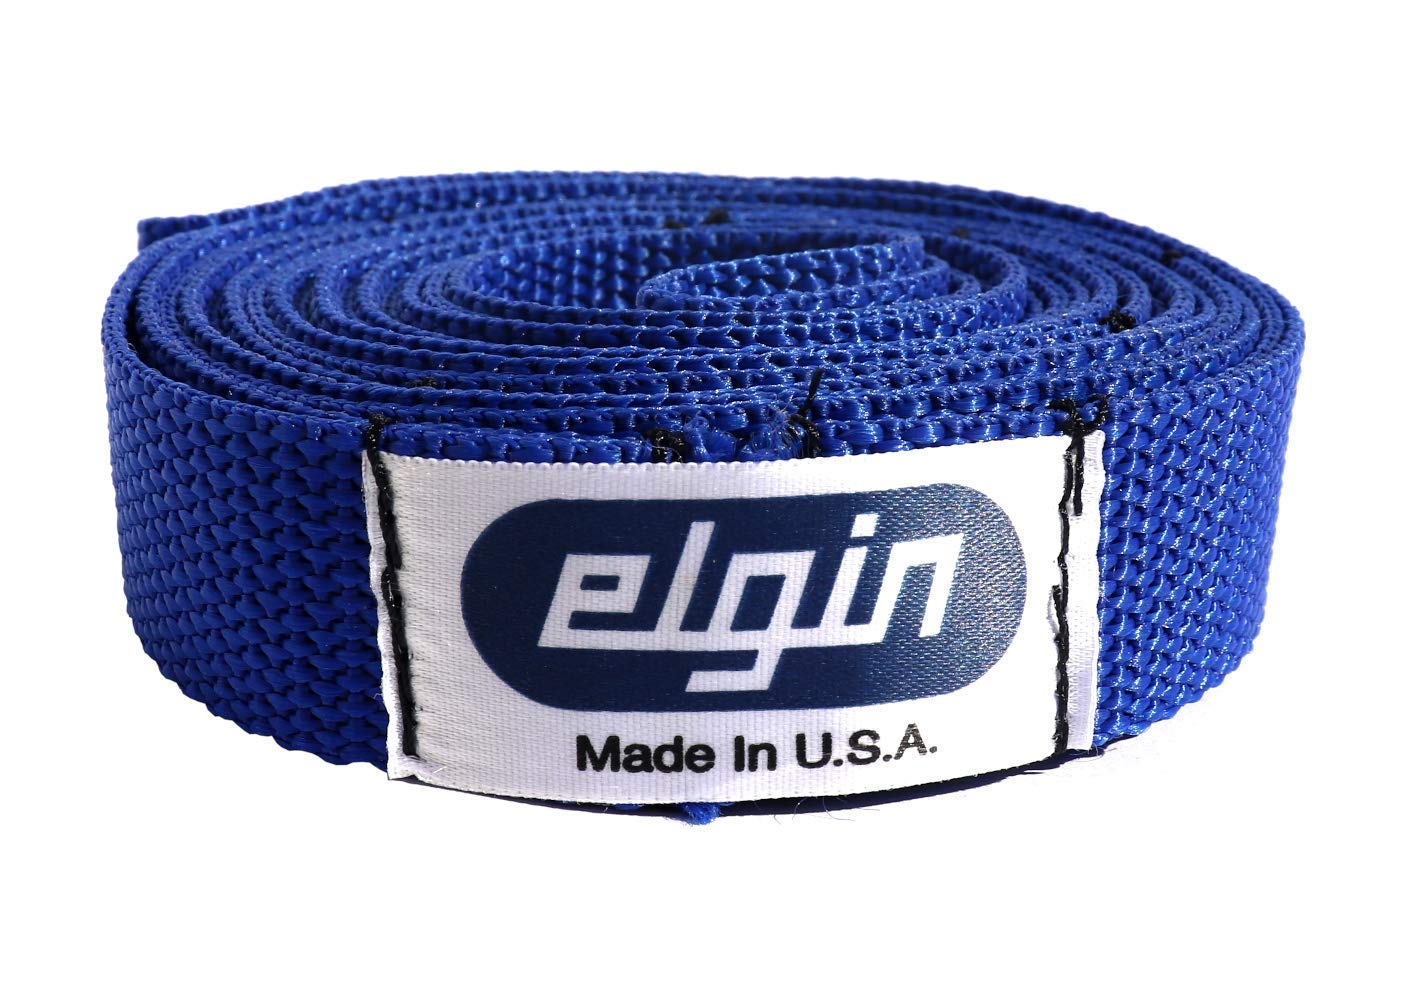 Elgin Stretch Strap with Loops to Stretch Out Muscles for Physical Therapy and Runners